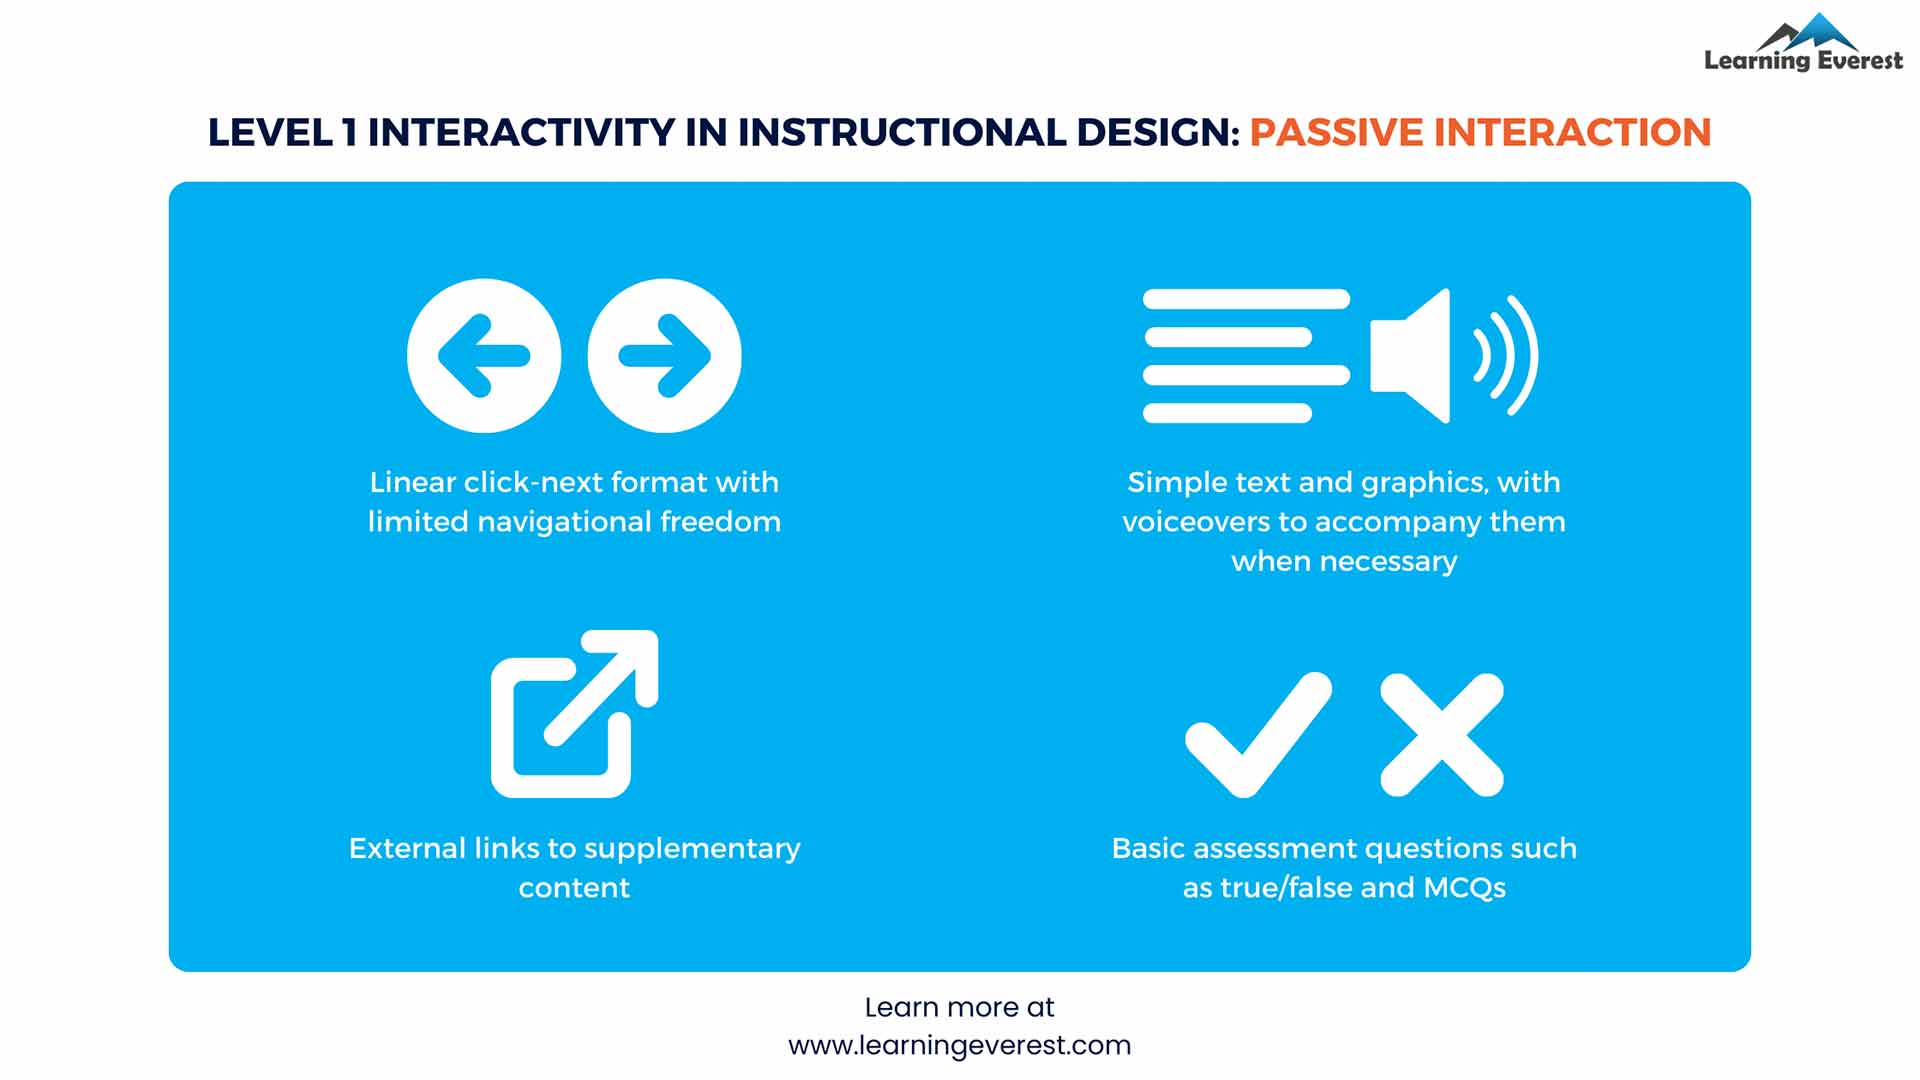 Level 1 Interactivity in Instructional Design - Passive Interaction